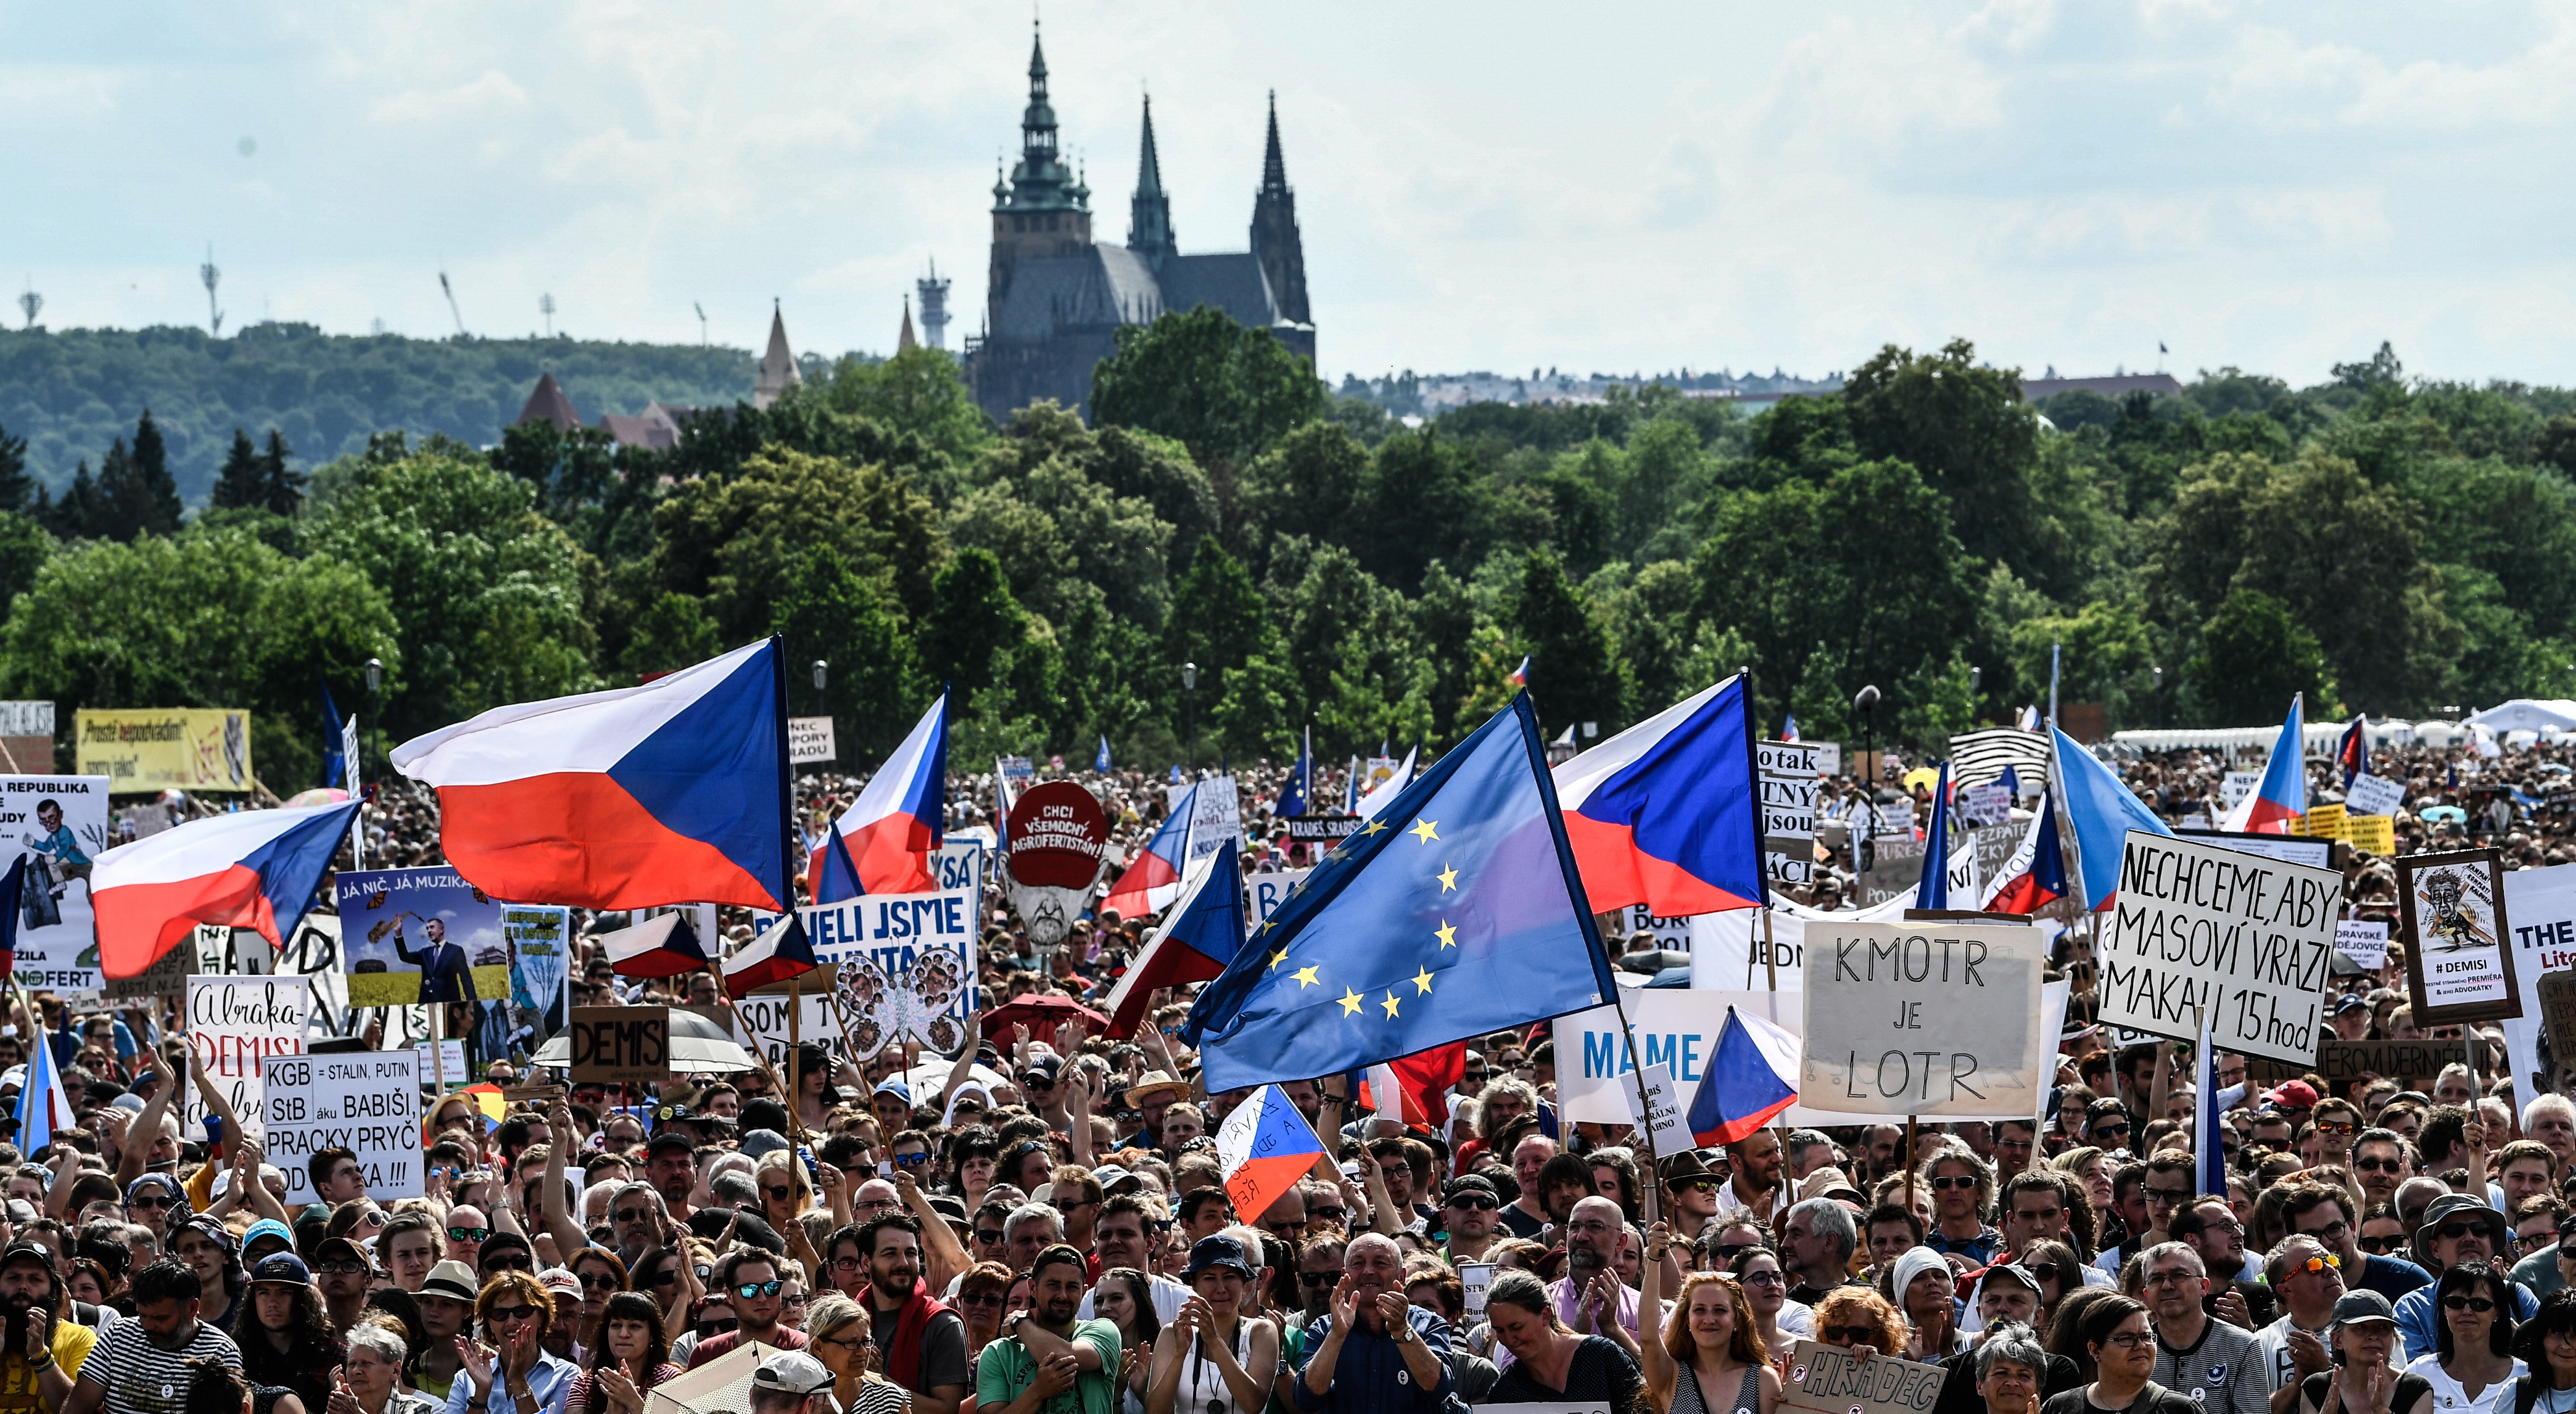 epa07668449 Thousands of demonstrators gather to protest against Czech Prime Minister Andrej Babis and new minister of justice, in the one of the biggest political demonstration against the government since the fall of communism in 1989 during Velvet Revolution, at the Letna Plain in Prague, Czech Republic, 23 June 2019. According to reports, hundreds of thousands people protest against appointing Marie Benesova as new justice minister and to demand the resignation of Czech Prime Minister Andrej Babis due to alleged conflicts of interest involving his former Agrofert conglomerate he founded and at the same time he is investigated of fraud in connection with subsidies paid by the European Union. The report suggests the country should return about 17.5 million euro that Agrofert received in EU funds.  EPA/FILIP SINGER